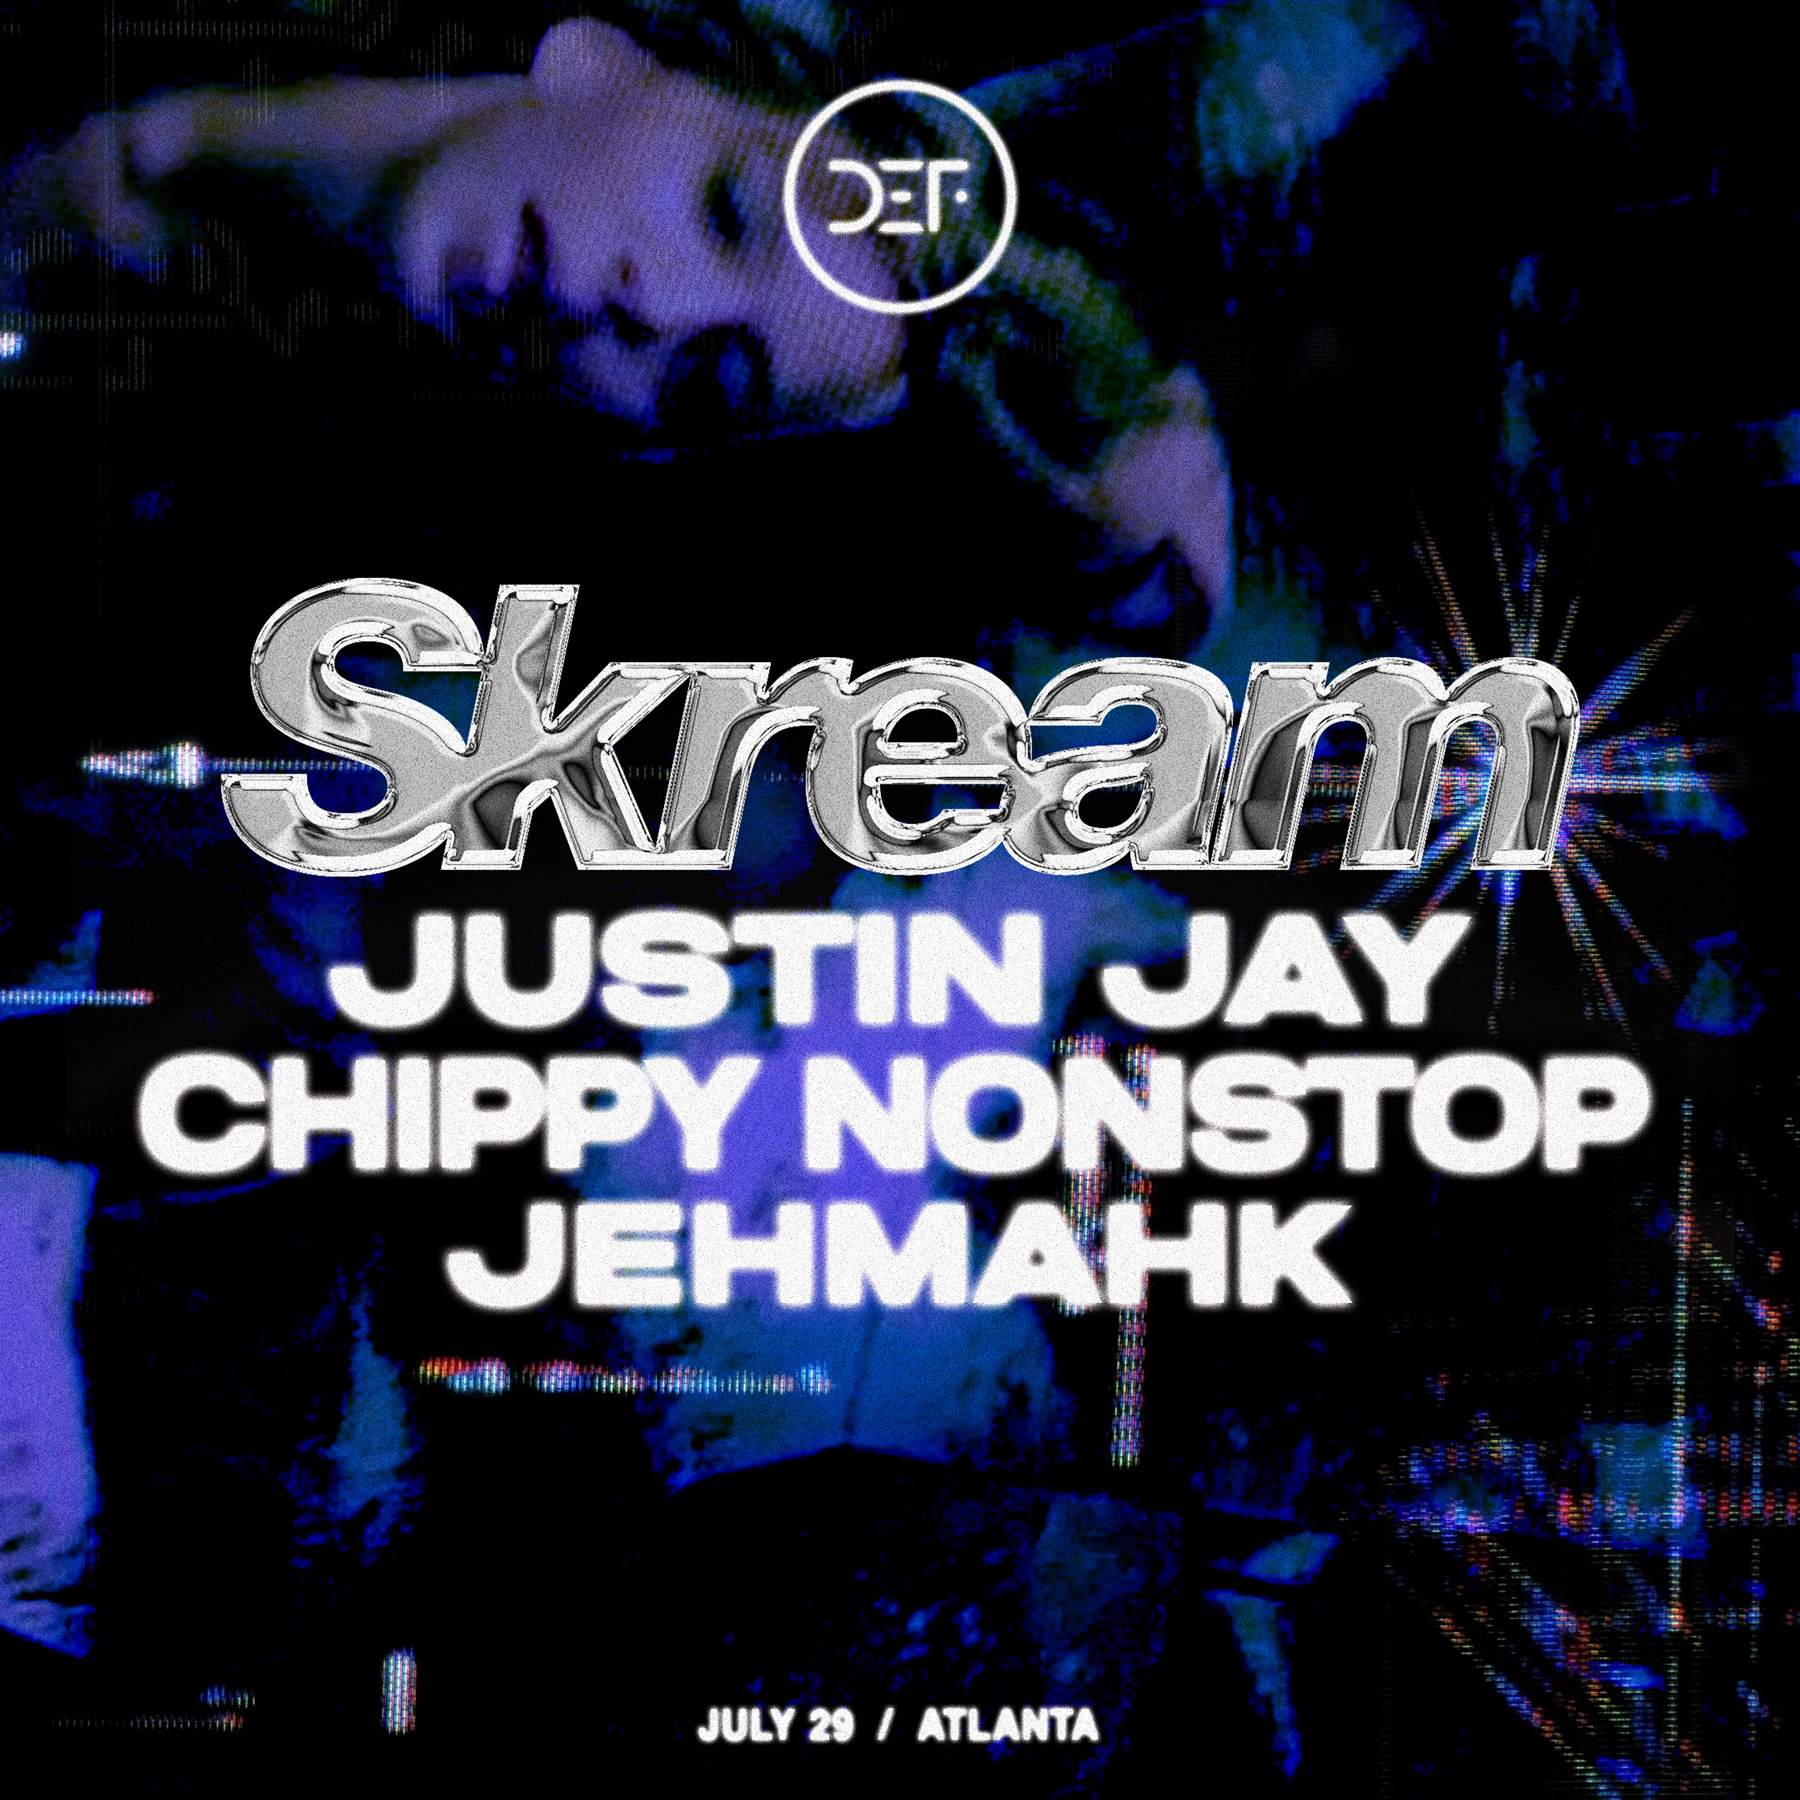 DEF with Skream, Justin Jay, Chippy Nonstop, JehMahk (SOLD OUT) - Página frontal